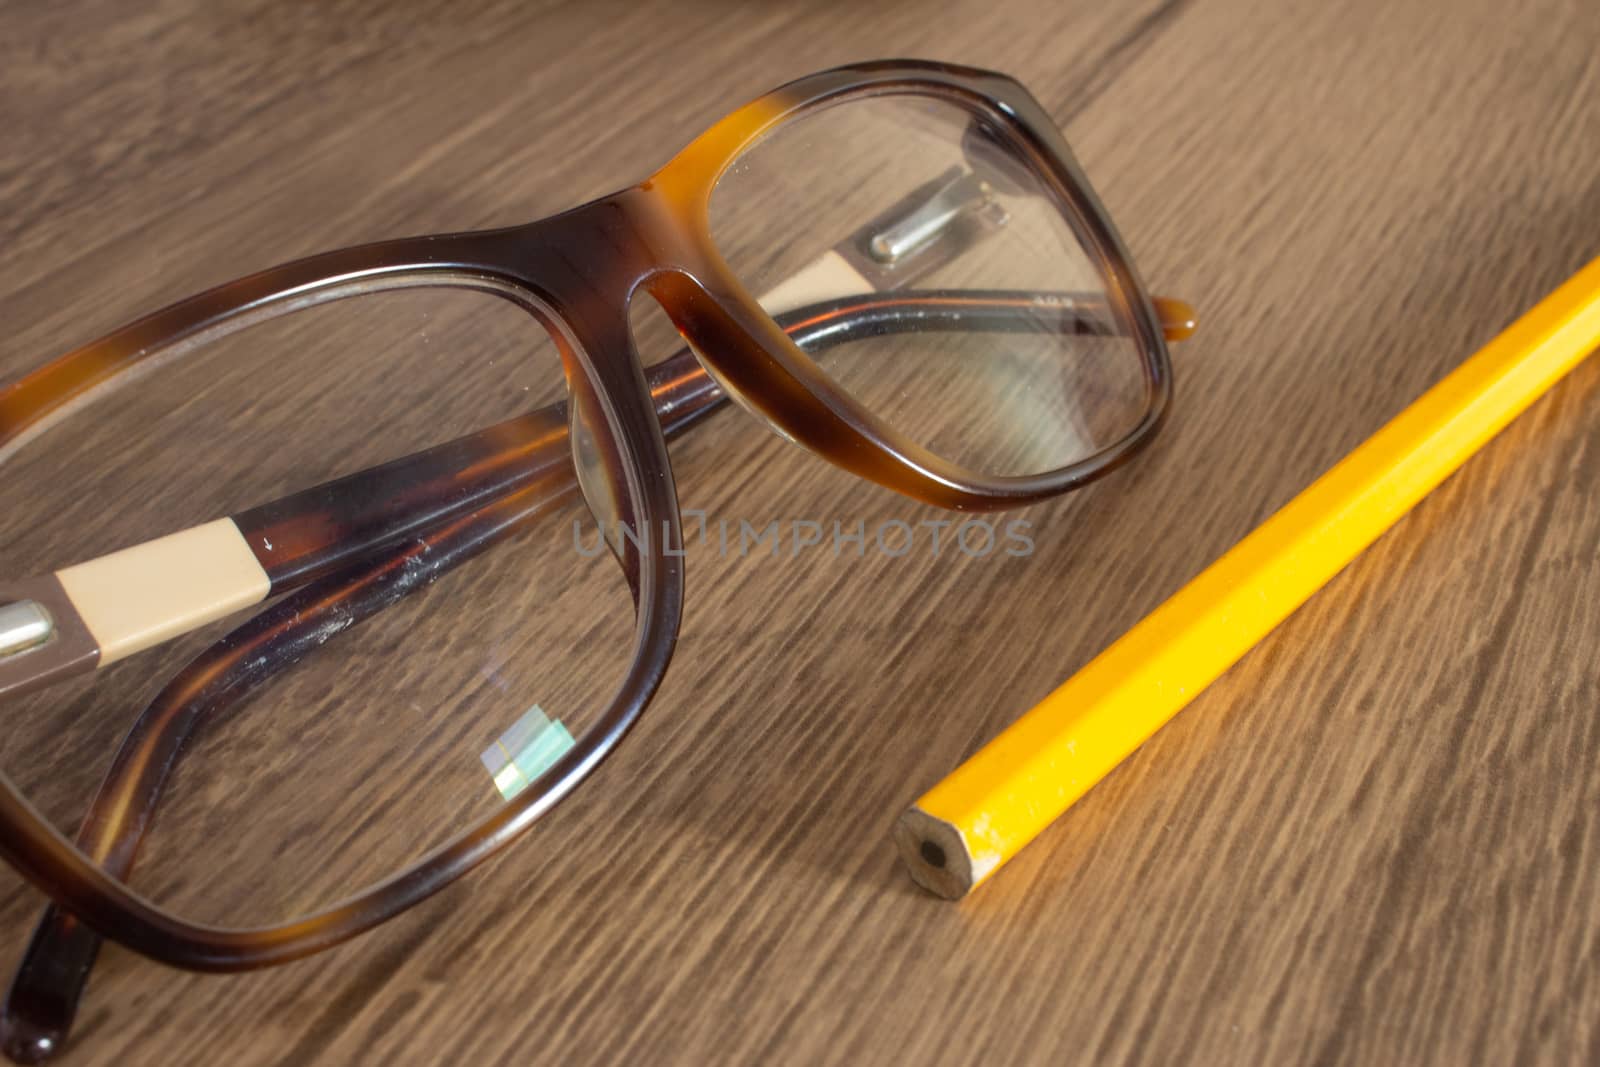 Par of glasses and a pencil on top of a wooden table